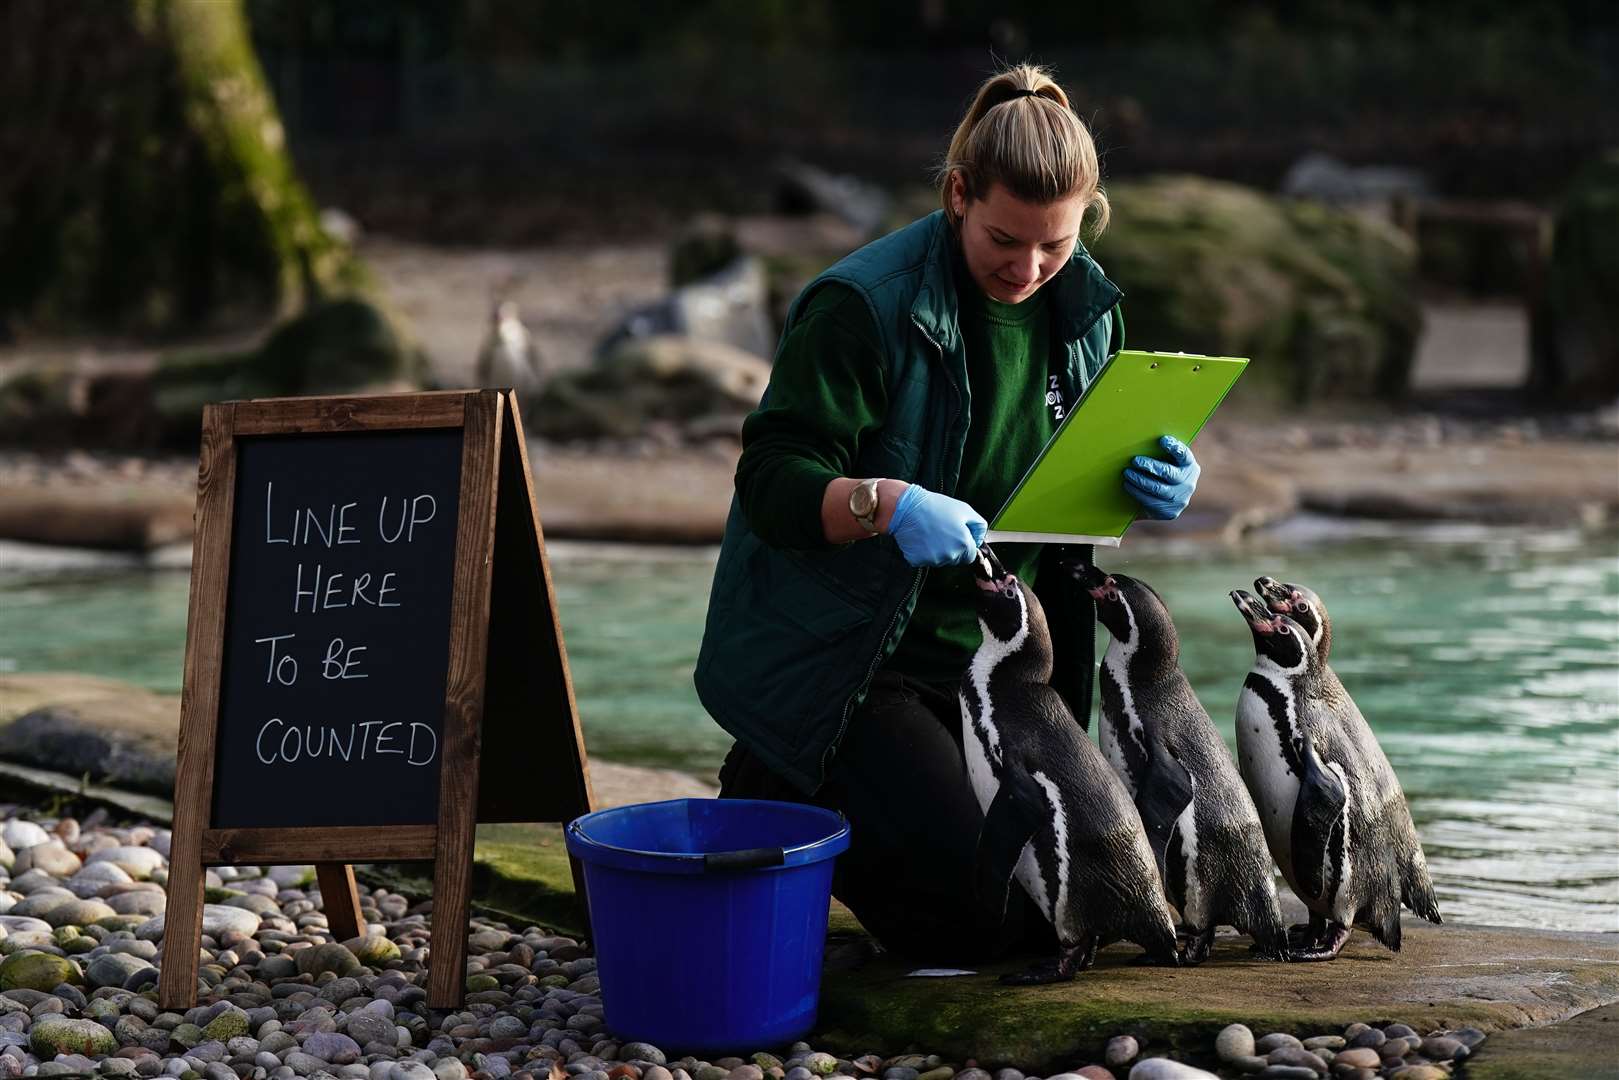 Humboldt penguins were tallied during the morning (Aaron Chown/PA)